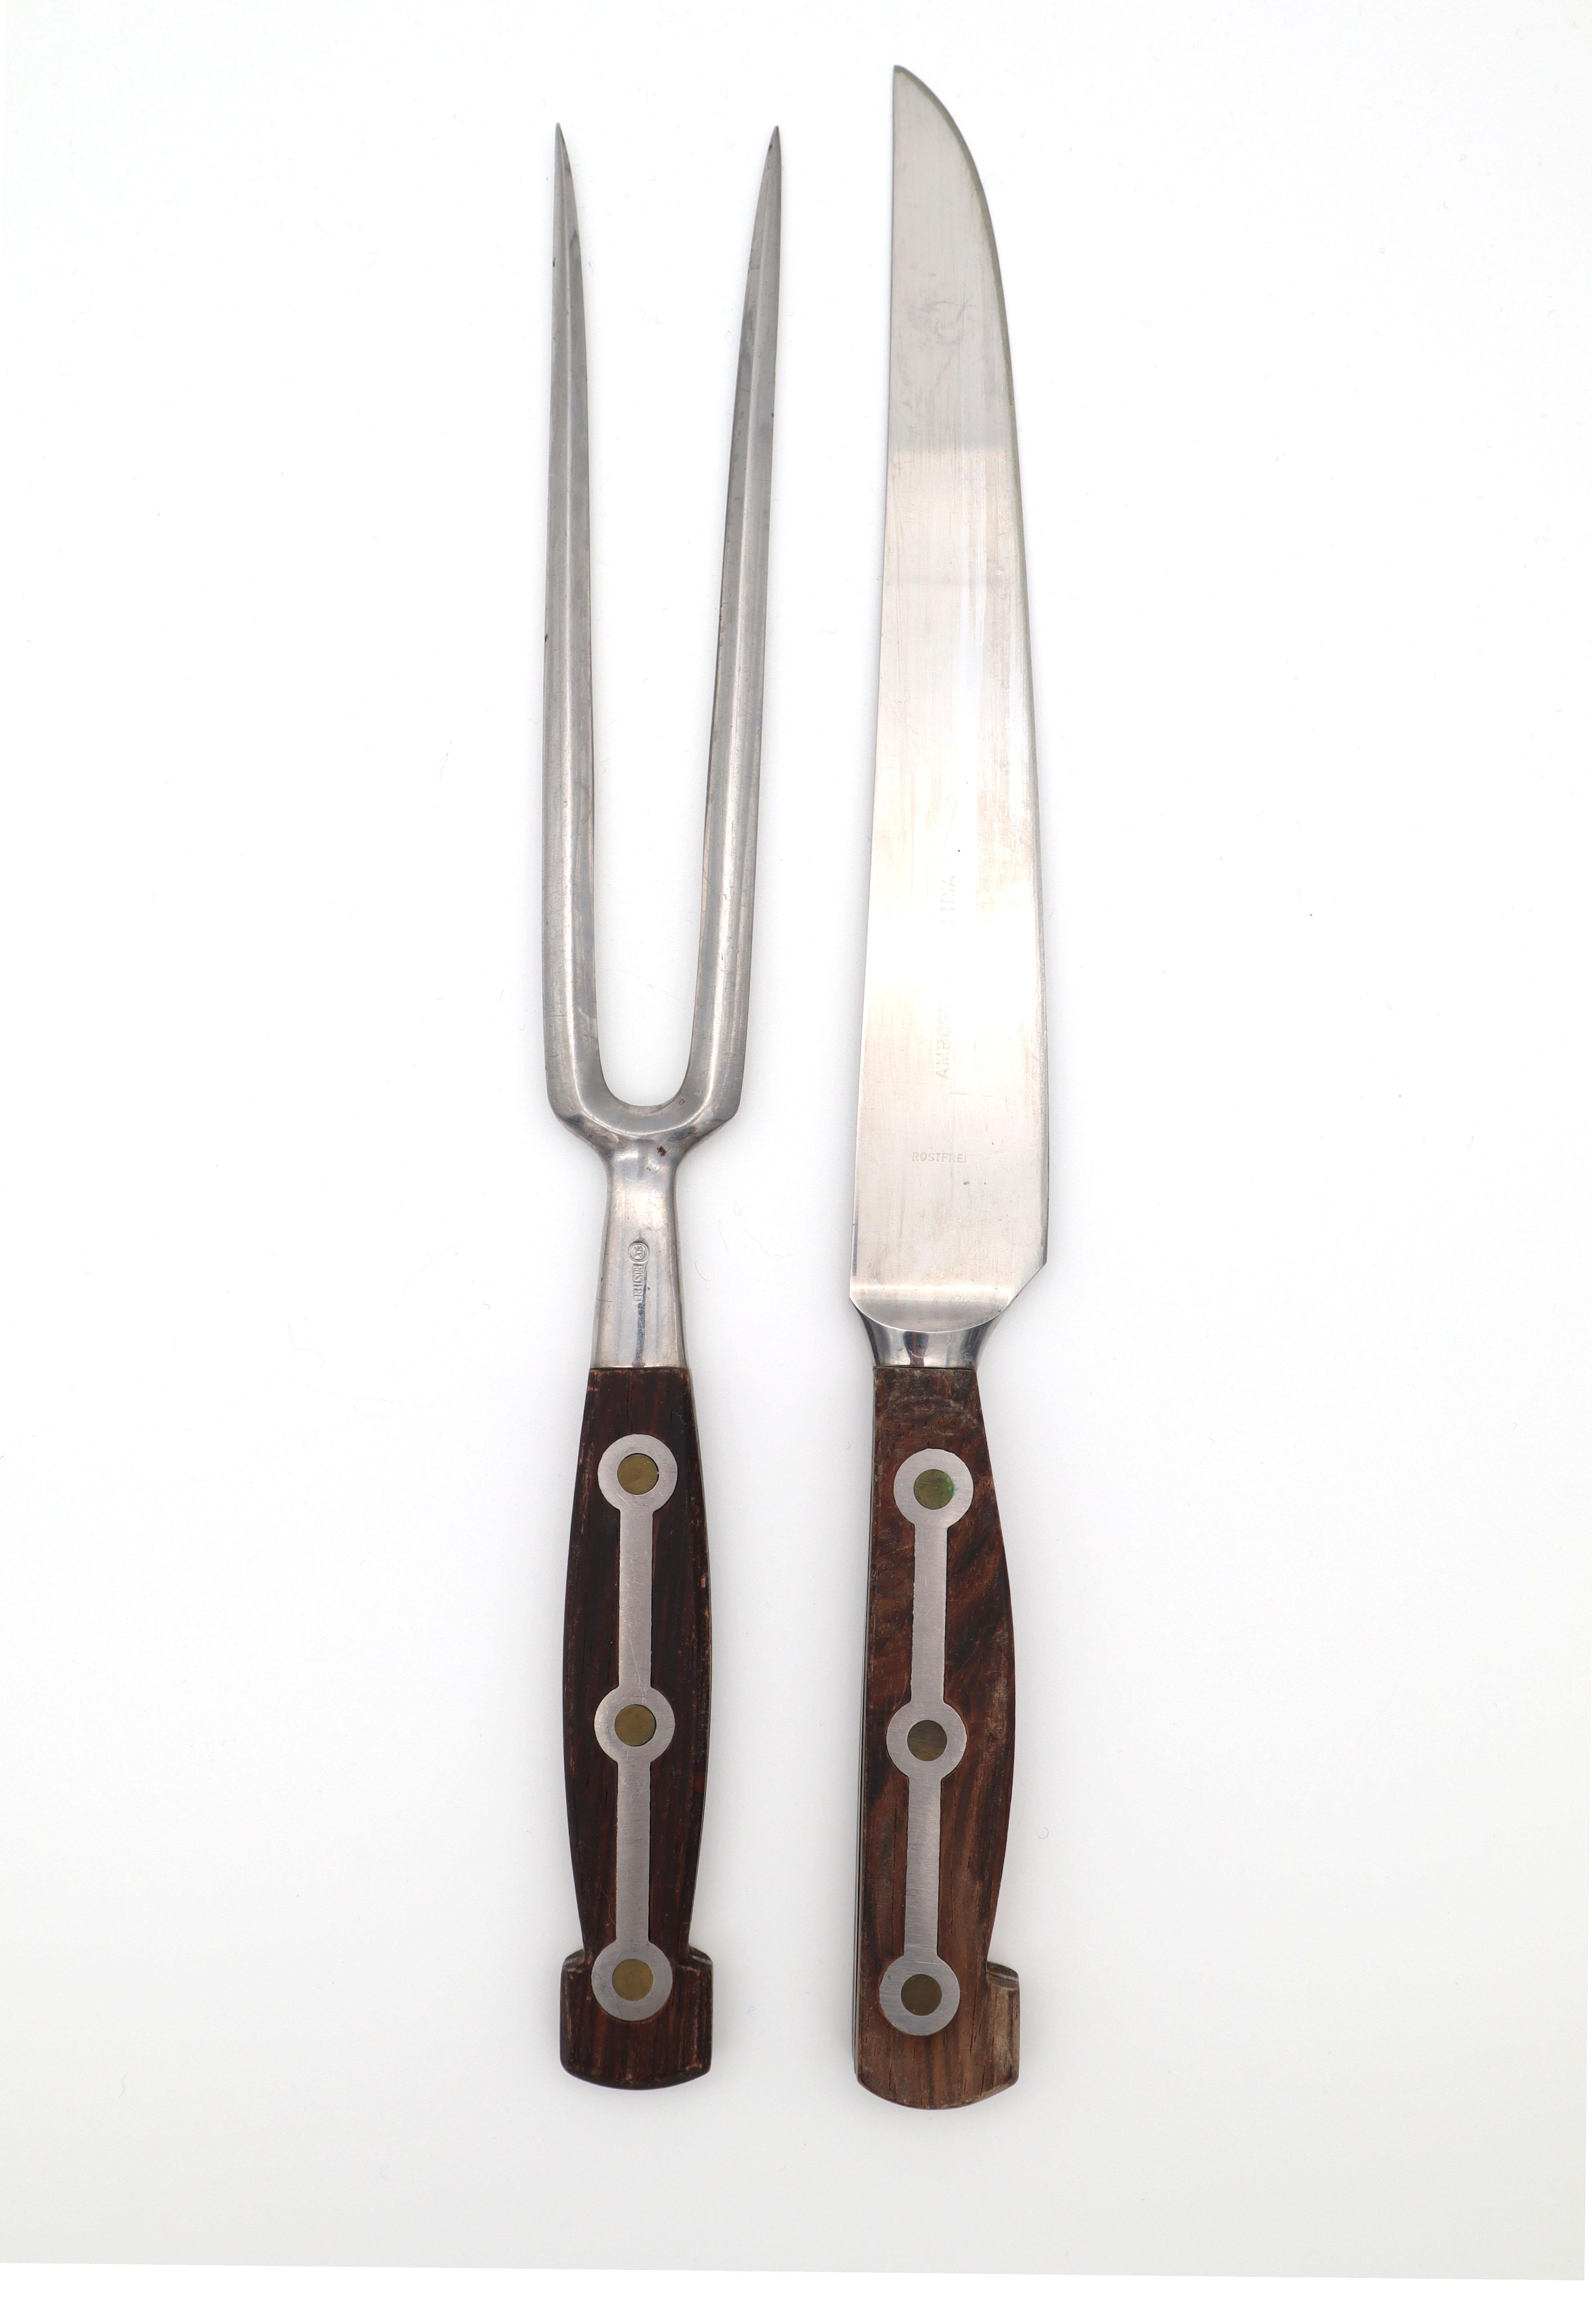 Stainless Steel Cutlery Model 1050 with Wooden Handle from Amboss Austria